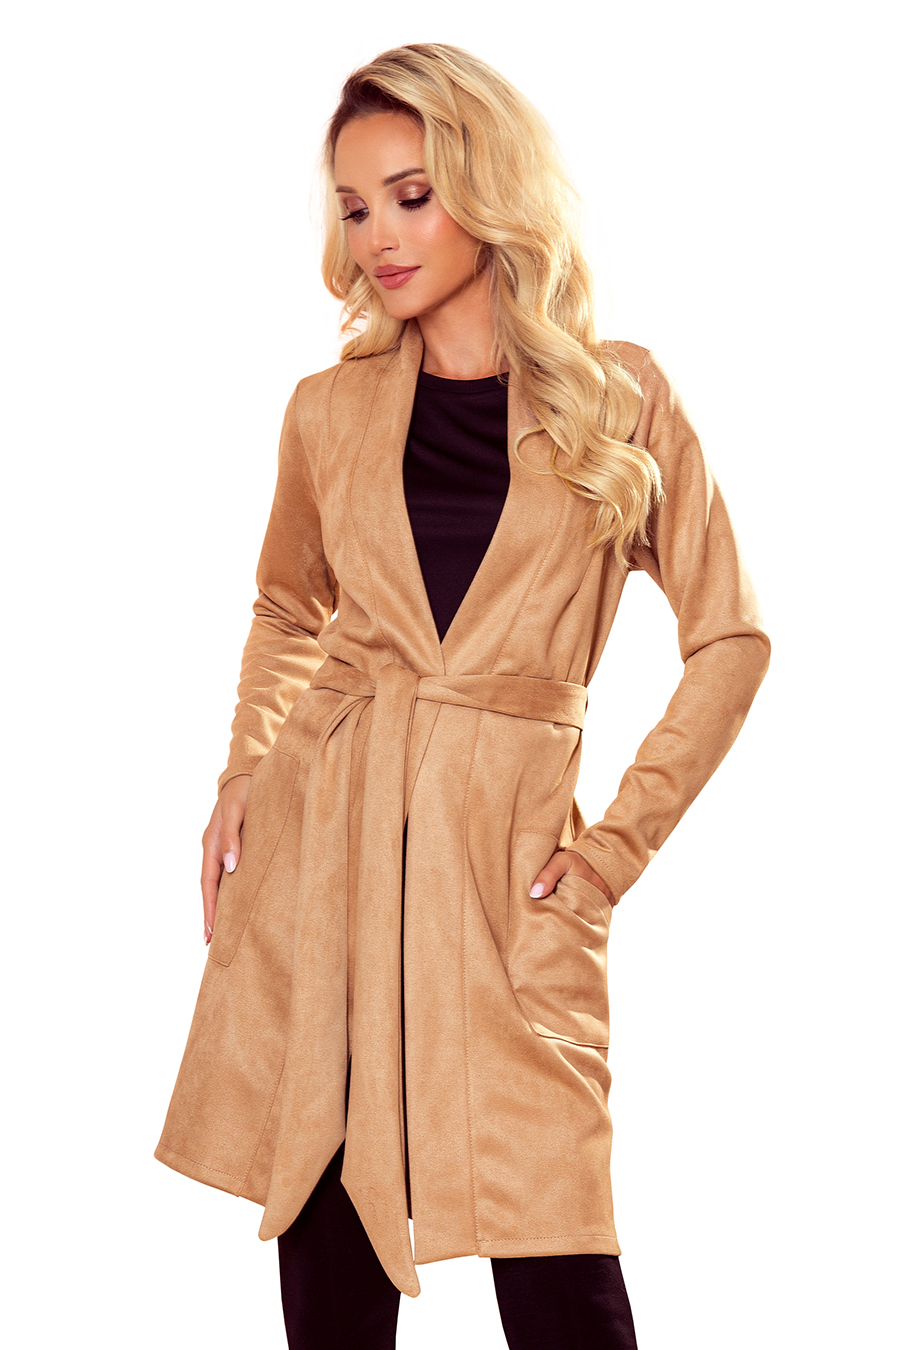 354-2 Suede coat with pockets and belt - beige